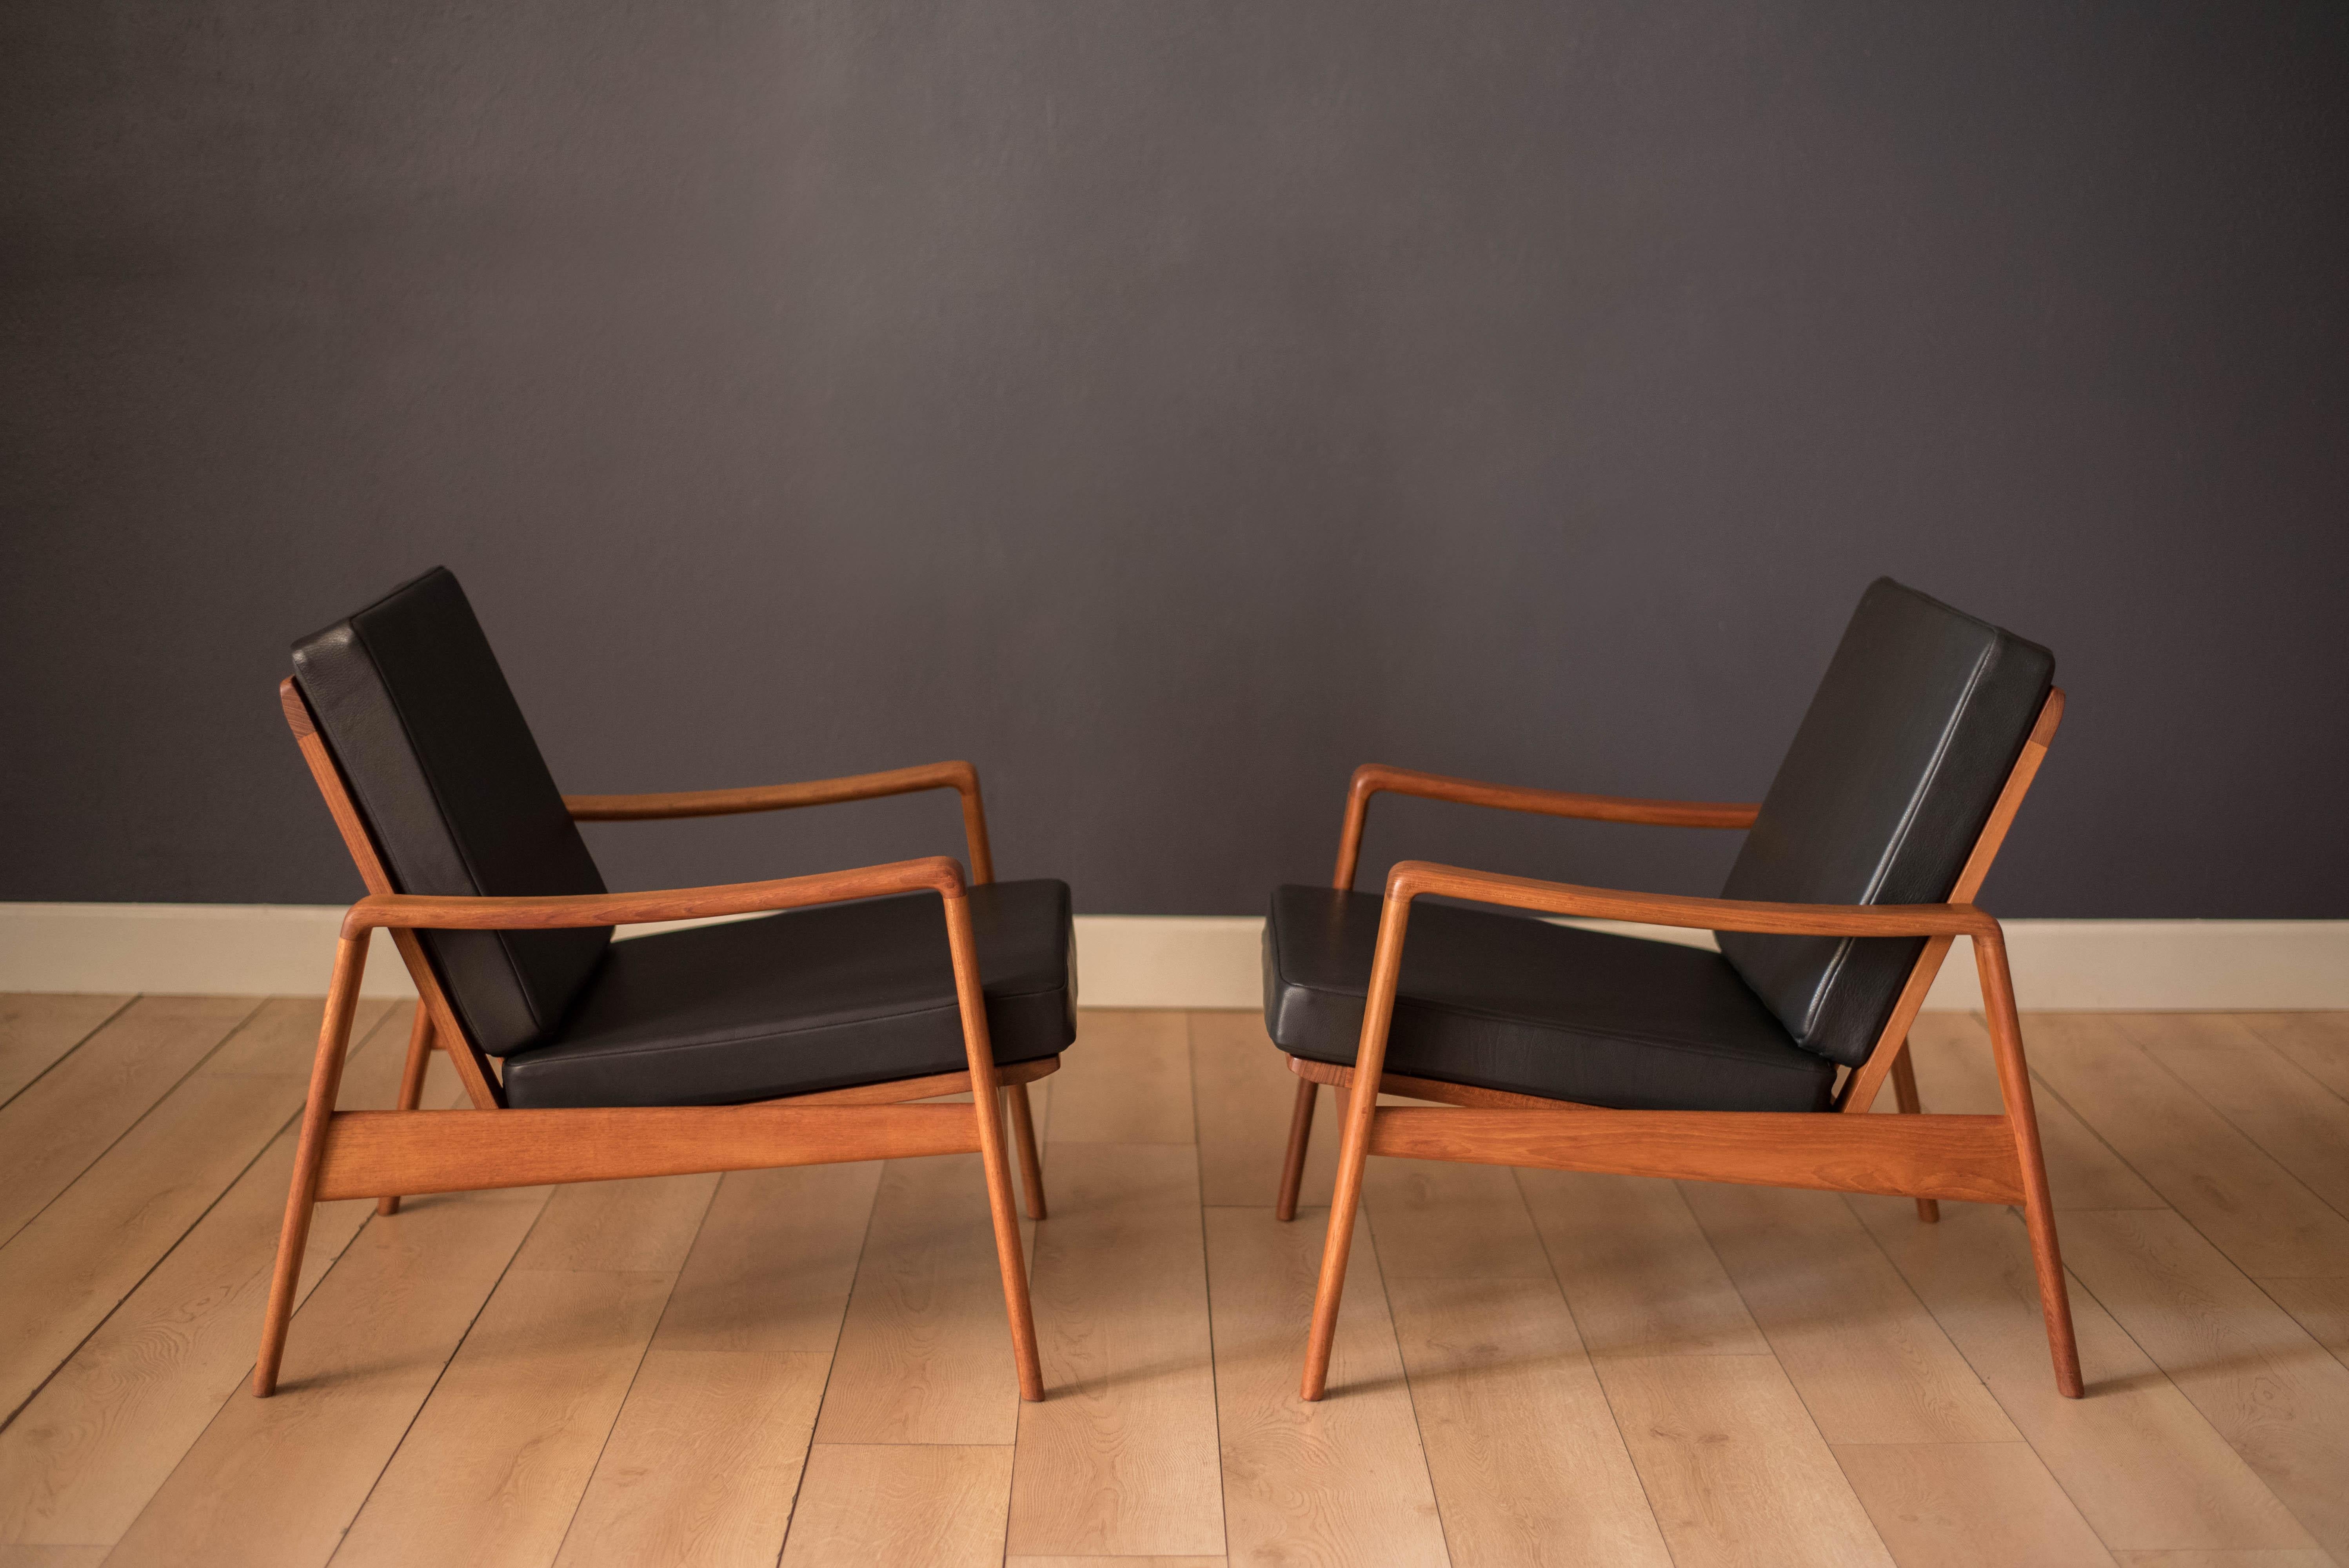 Mid-Century Modern pair of easy lounge chairs in teak designed by Arne Wahl Iversen for Komfort, Denmark. This set includes brand new foam seats and black leather. Sculptural modern teak frames can be displayed at any angle with a unique tapered